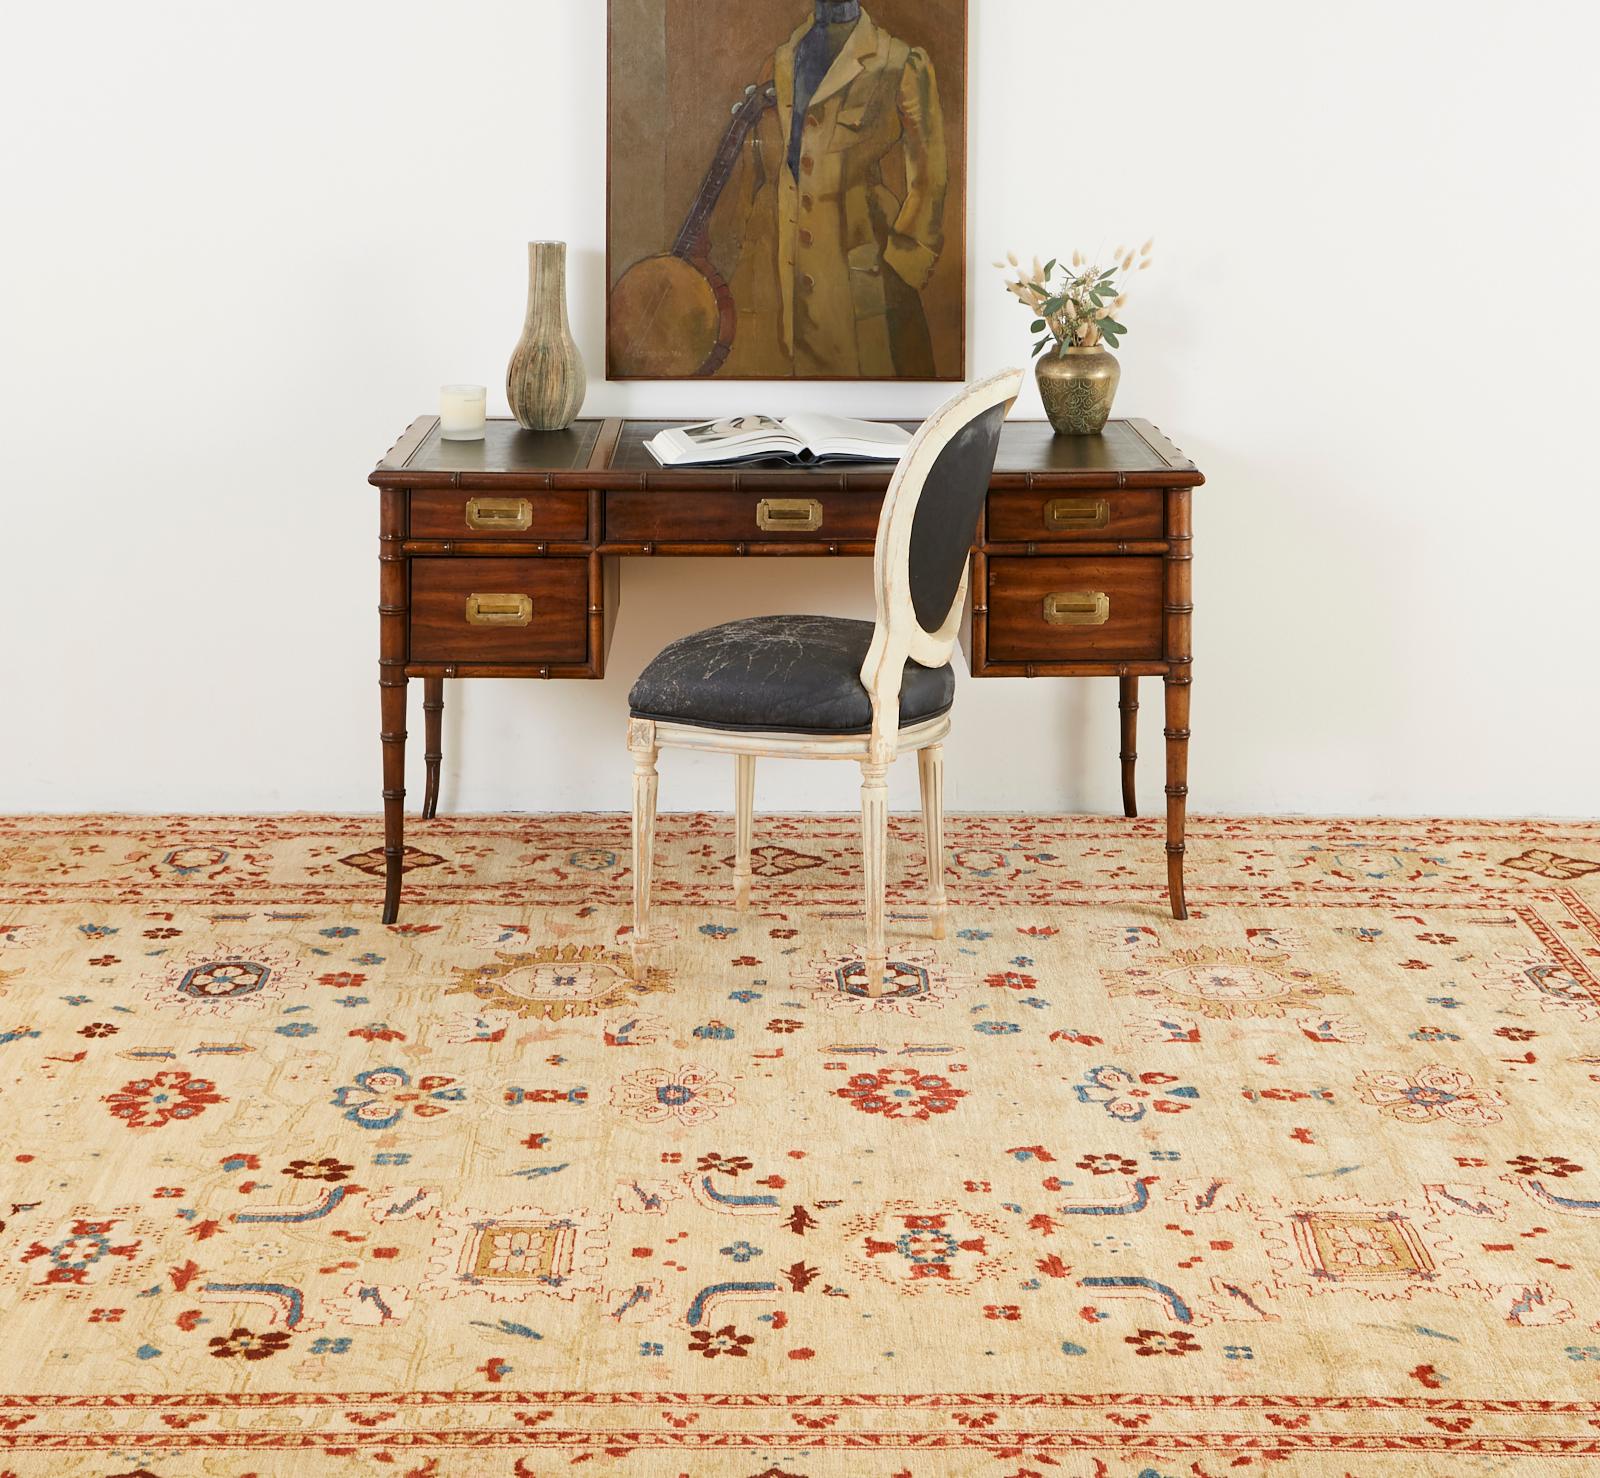 Traditional style Persian Sultanabad carpet featuring a light camel colored field decorated with larger floral and vine motifs. The rug is signed by the weaver in a panel on bottom. The rug has vibrant jewel tone blue, red, and maroon colors with